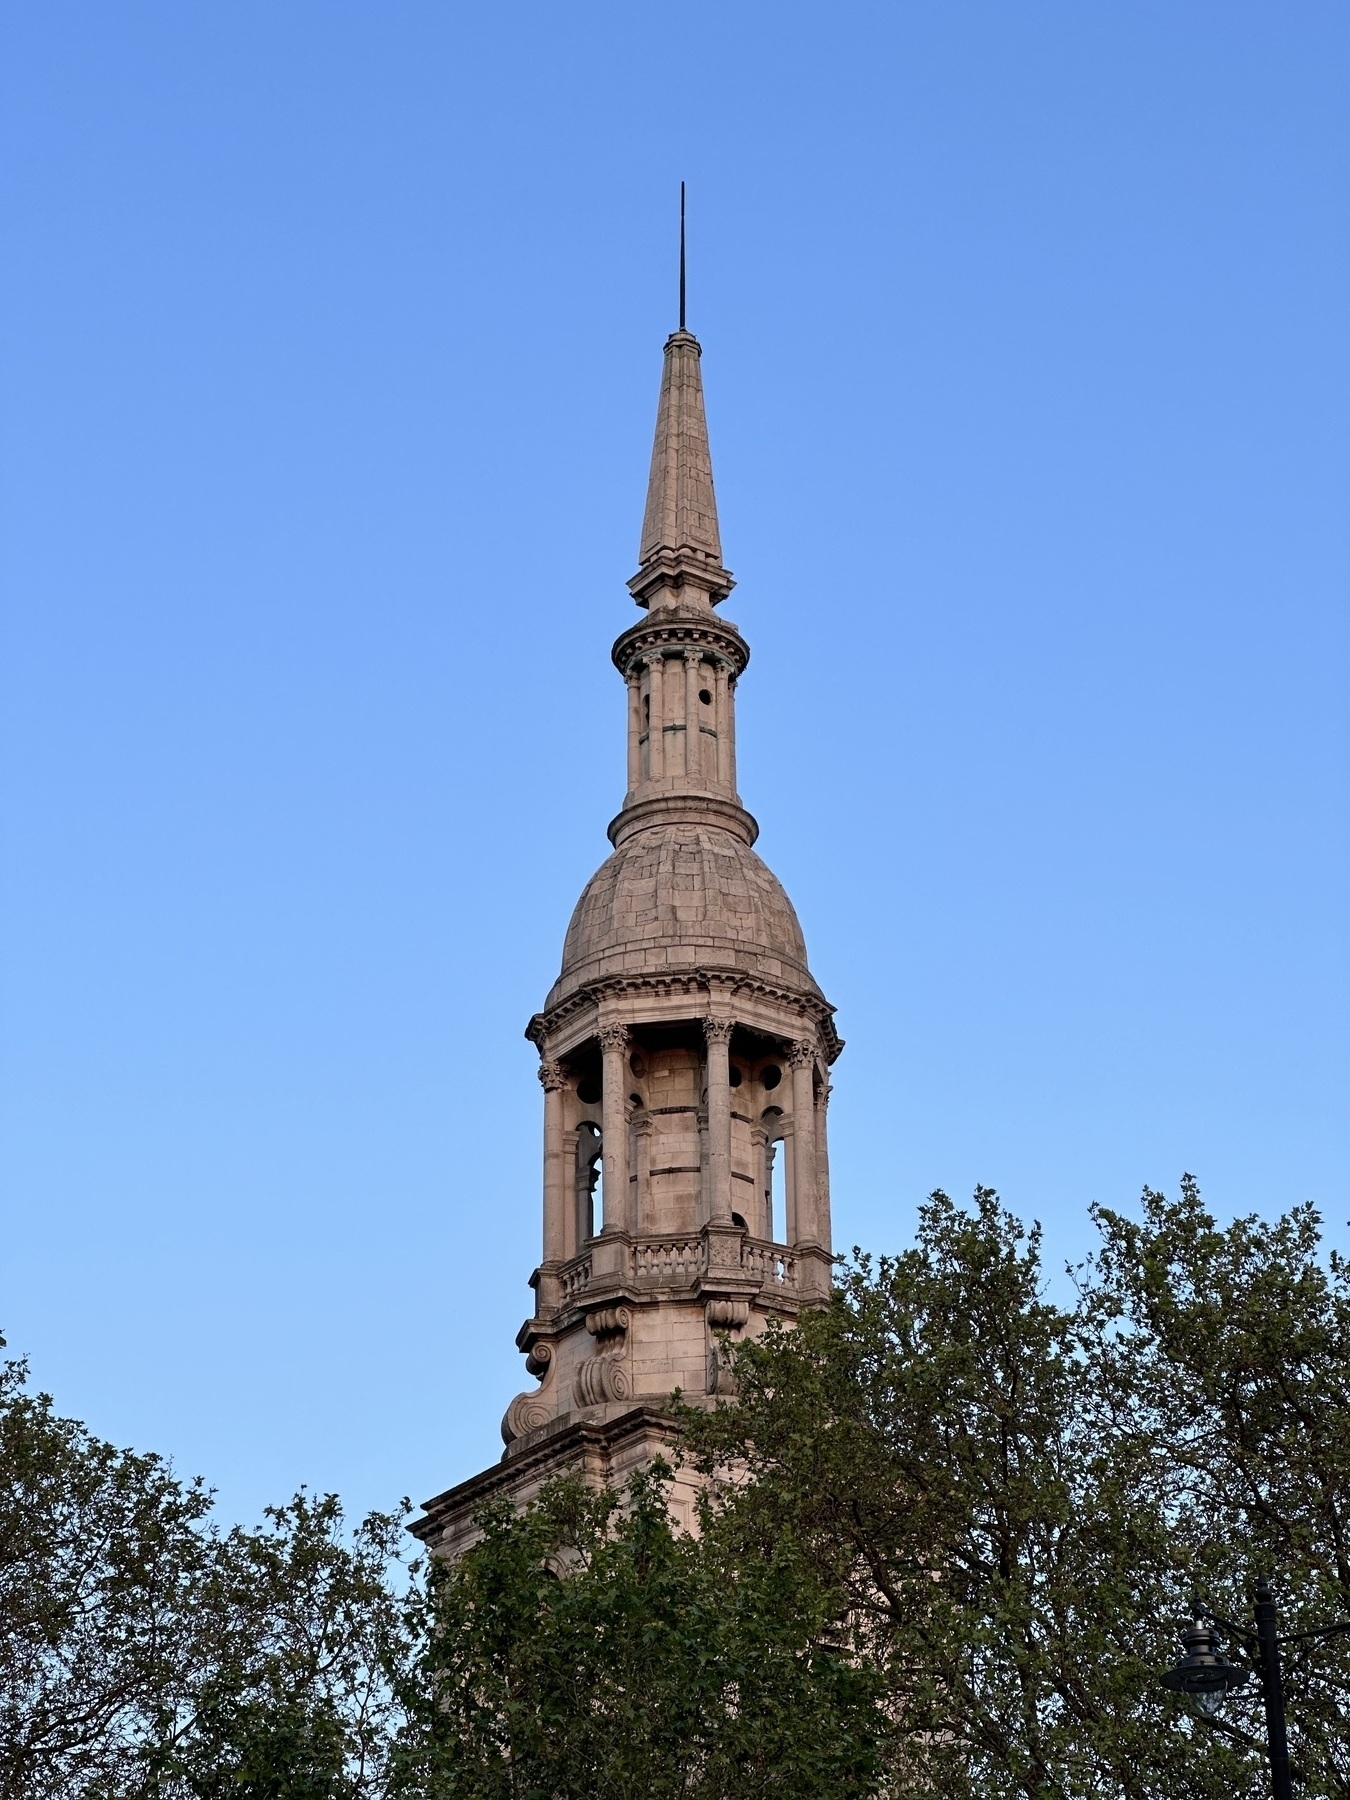 A stone church spire, lit with the warm light of sunset. Some trees are in the foreground and the background is a clear blue sky.